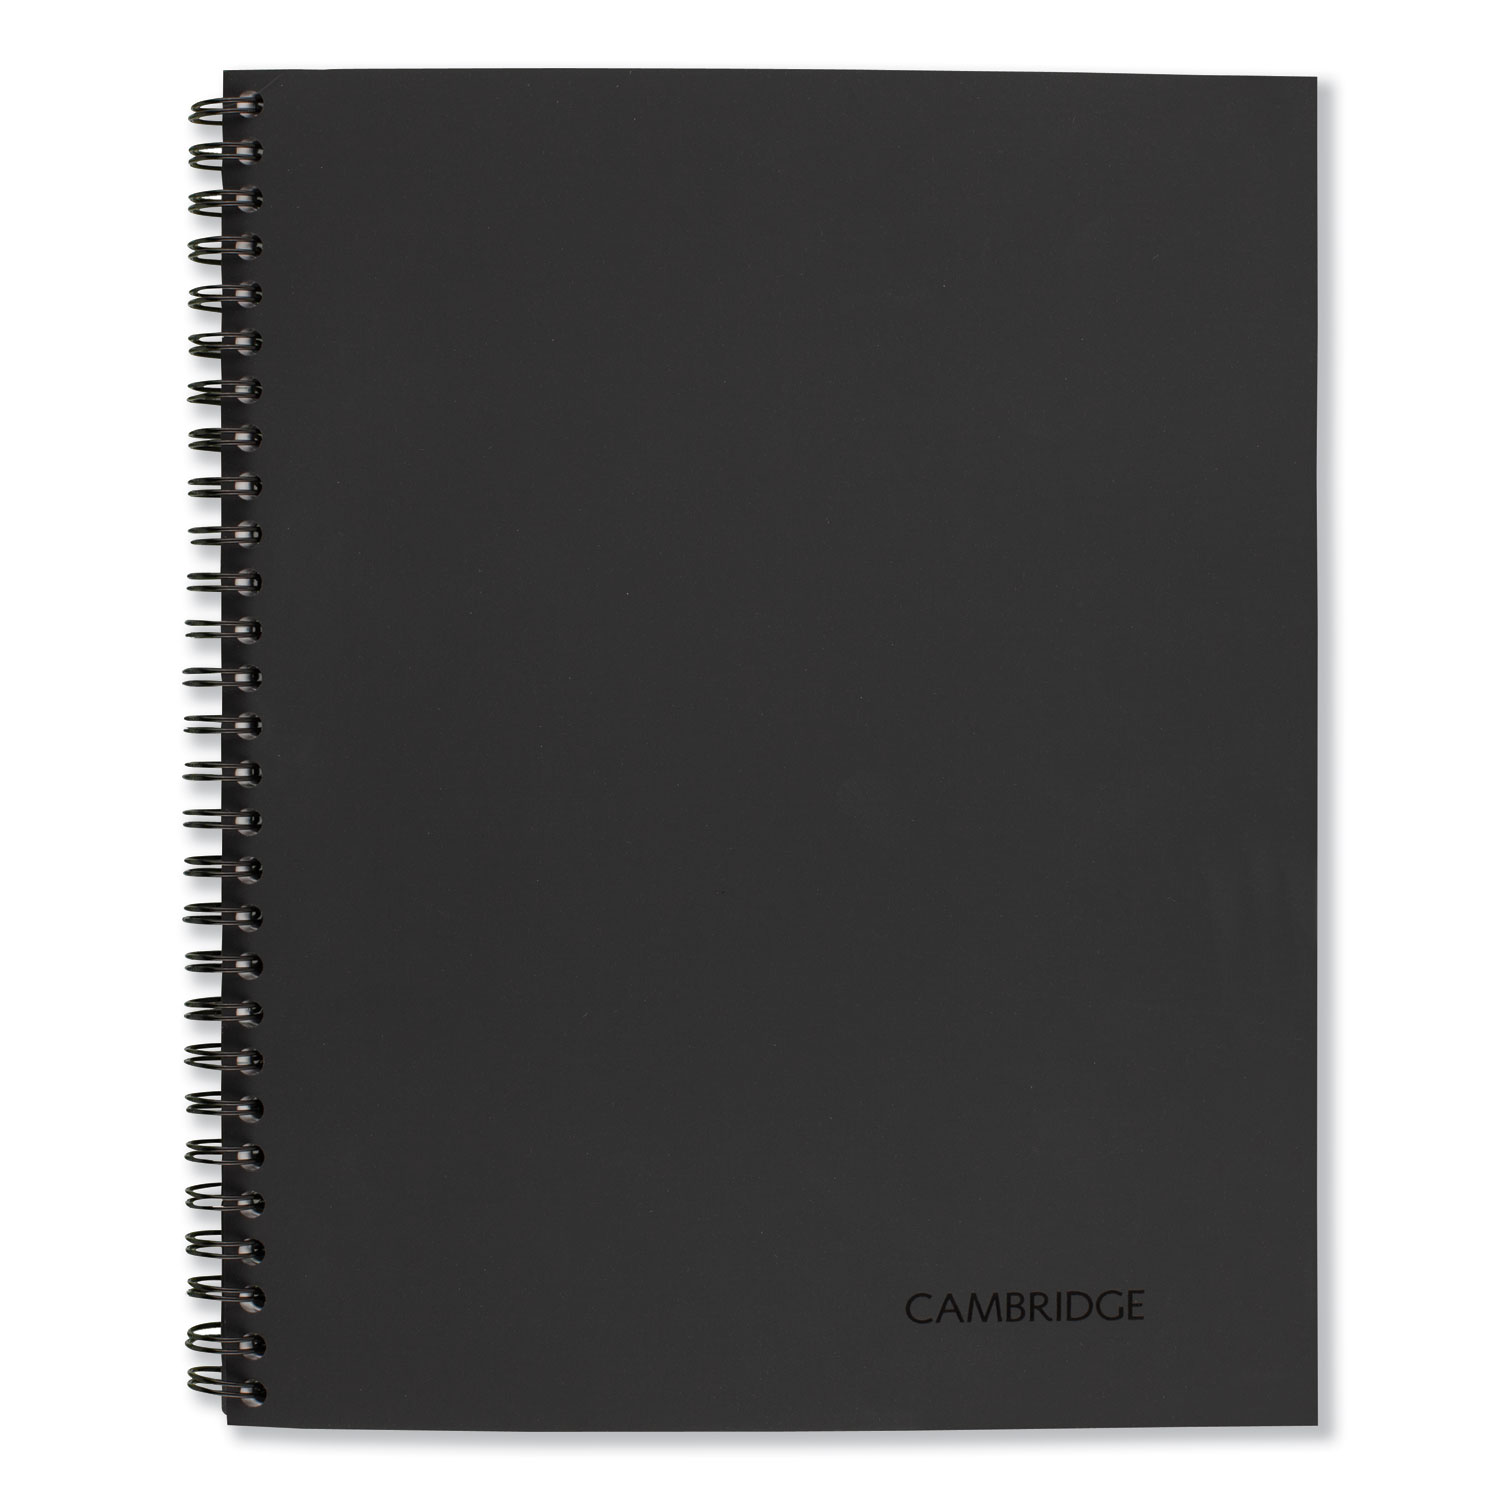  Cambridge 06672 Wirebound Business Notebook, Wide/Legal Rule, Black Cover, 9.5 x 6.68, 80 Sheets (MEA06672) 